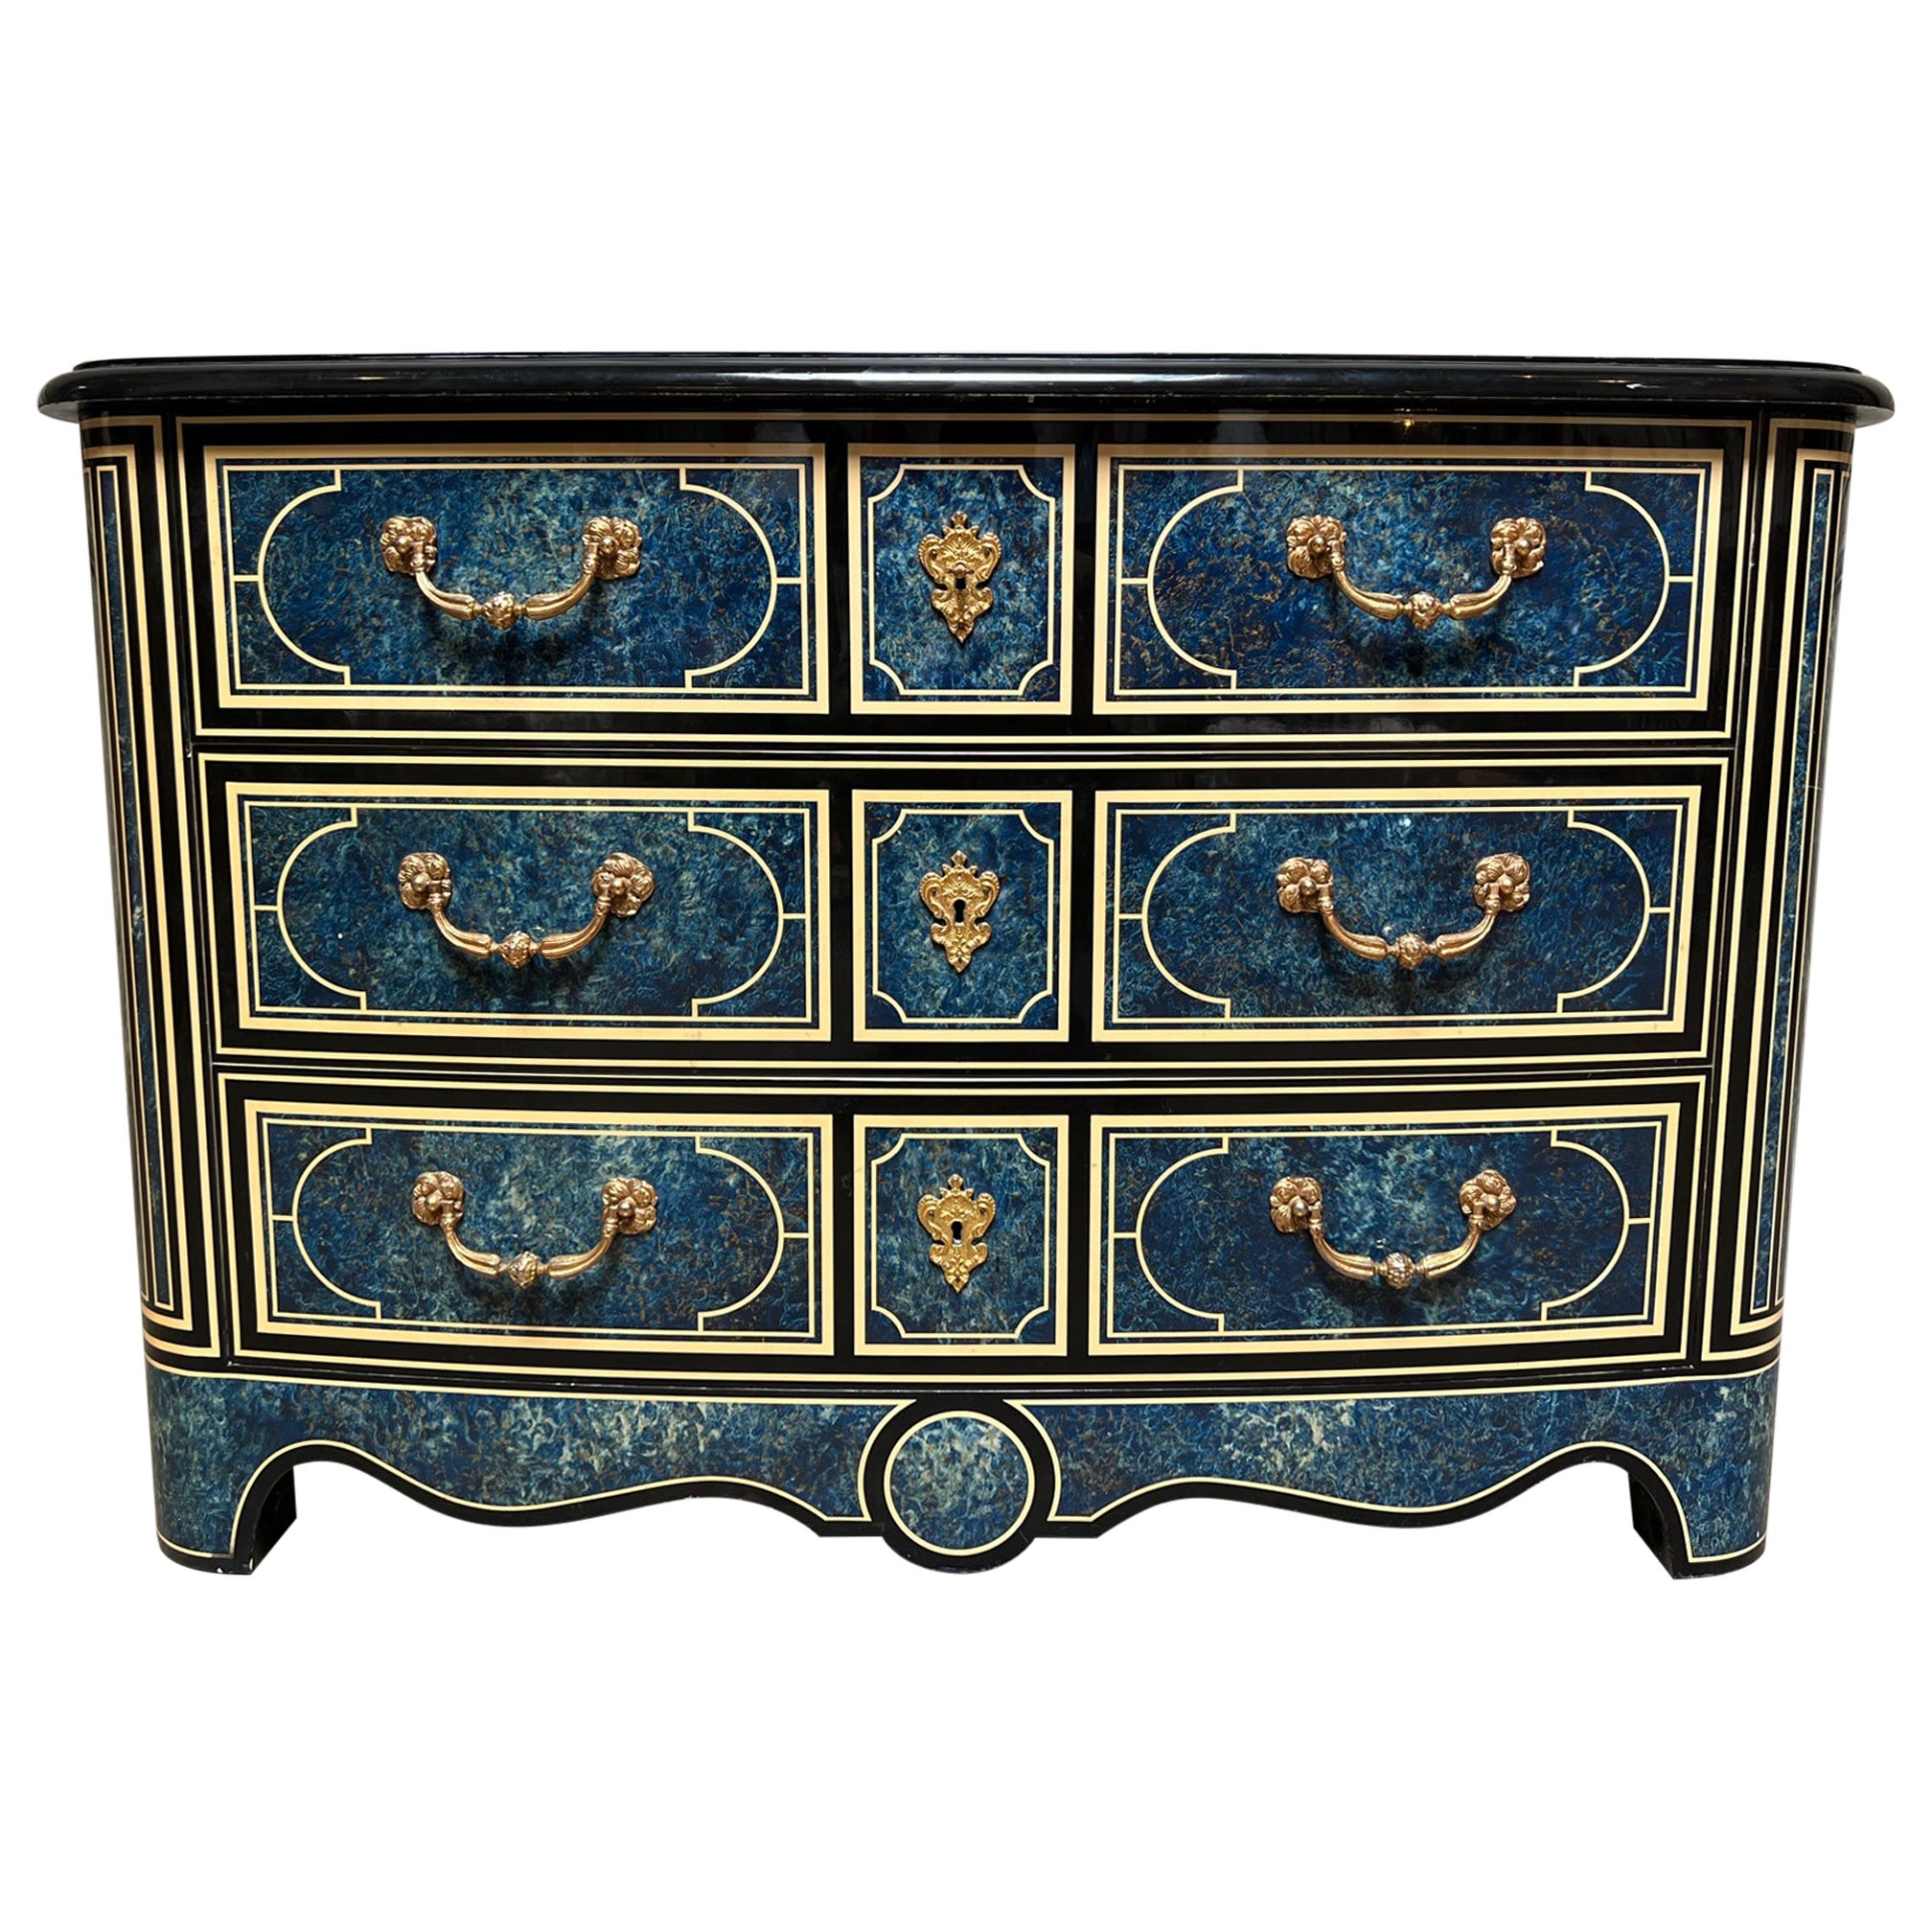 French Regence Style Commode with a Blue, White and Black Lacquered Finish